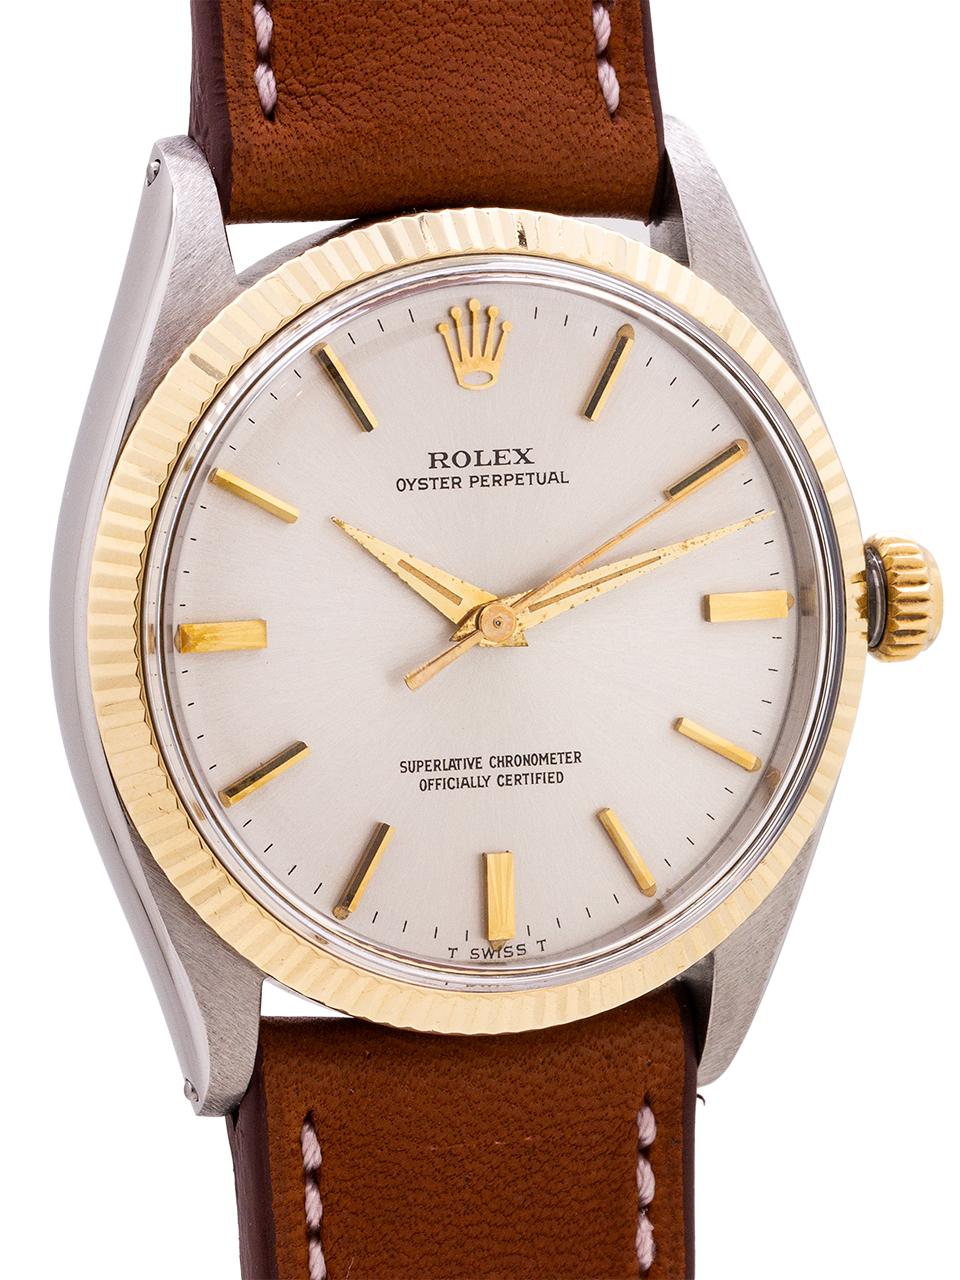 
A beautiful condition example Rolex Oyster Perpetual in SS and 14K yellow gold, ref 1005 serial# 1.3 million circa 1966. Featuring 34mm diameter Oyster case with screw down crown and case back, fluted 14K YG bezel, acrylic crystal, and original